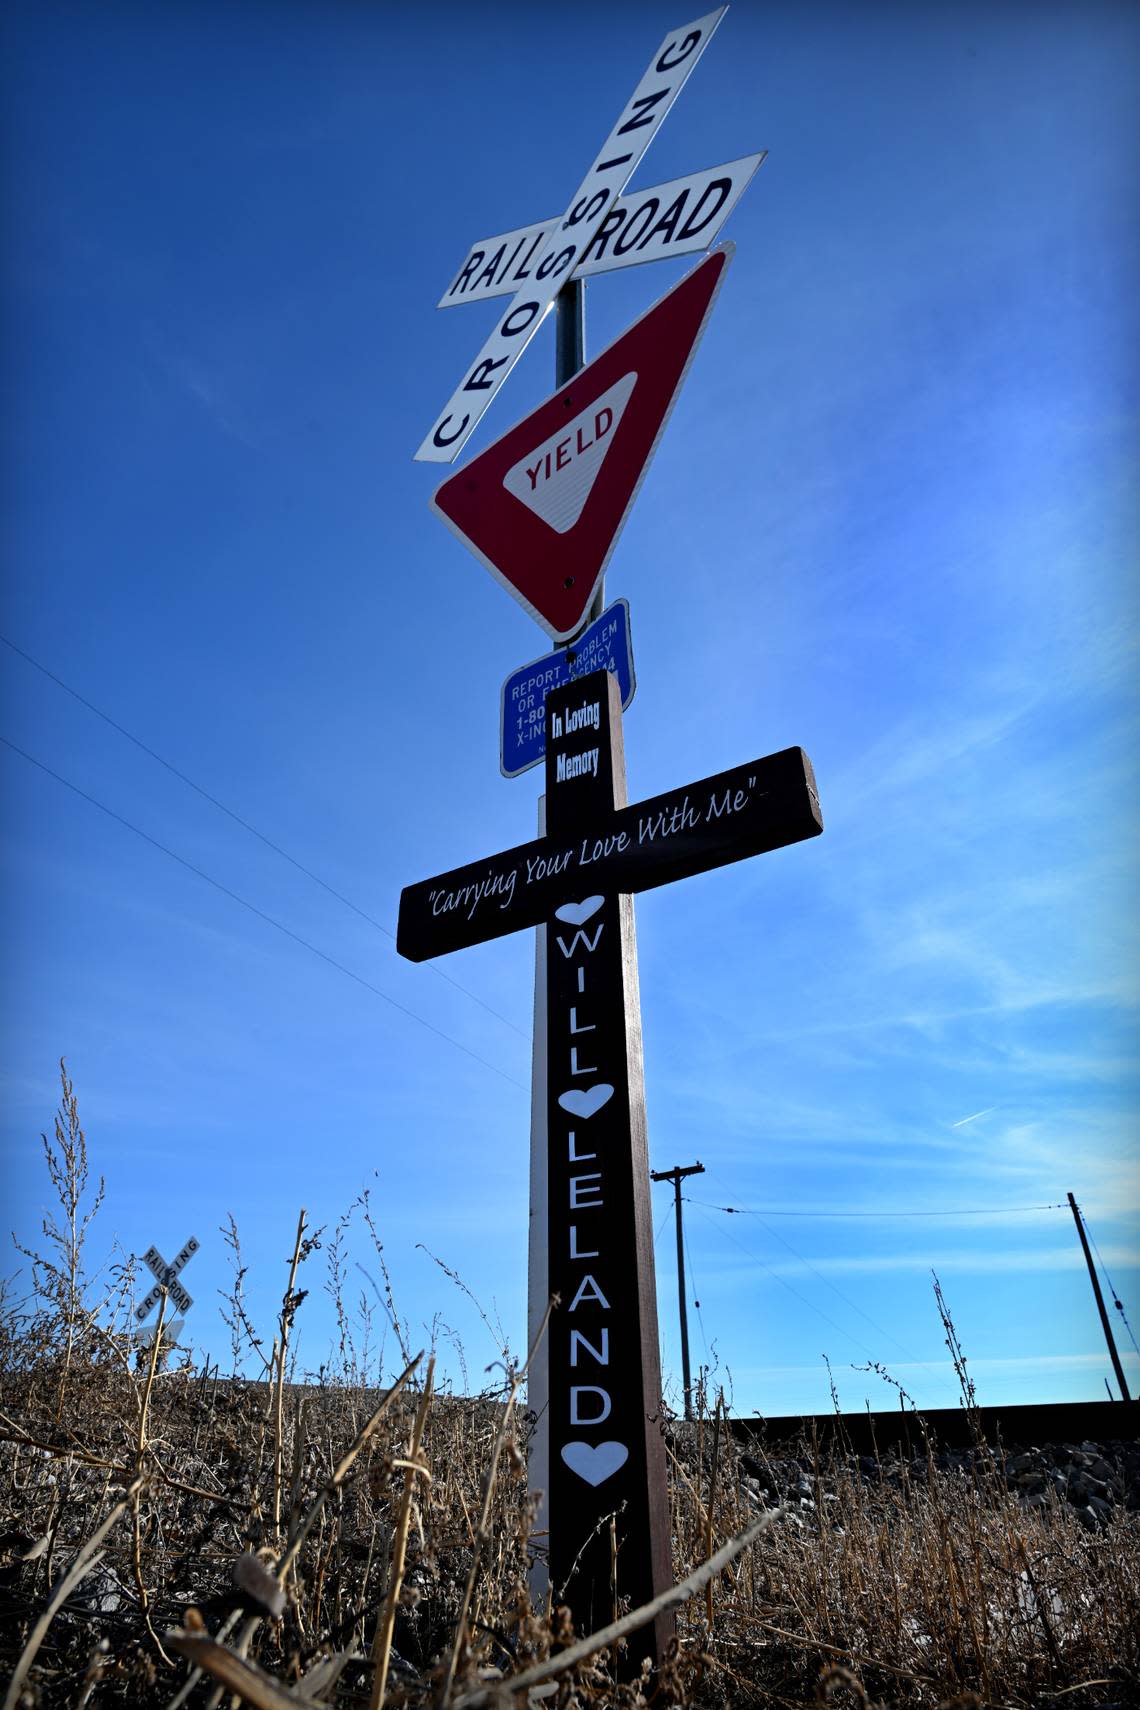 A cross with the names of two men who died when their vehicles were struck by Norfolk Southern freight trains has been placed at the crossing near Salisbury, Missouri.